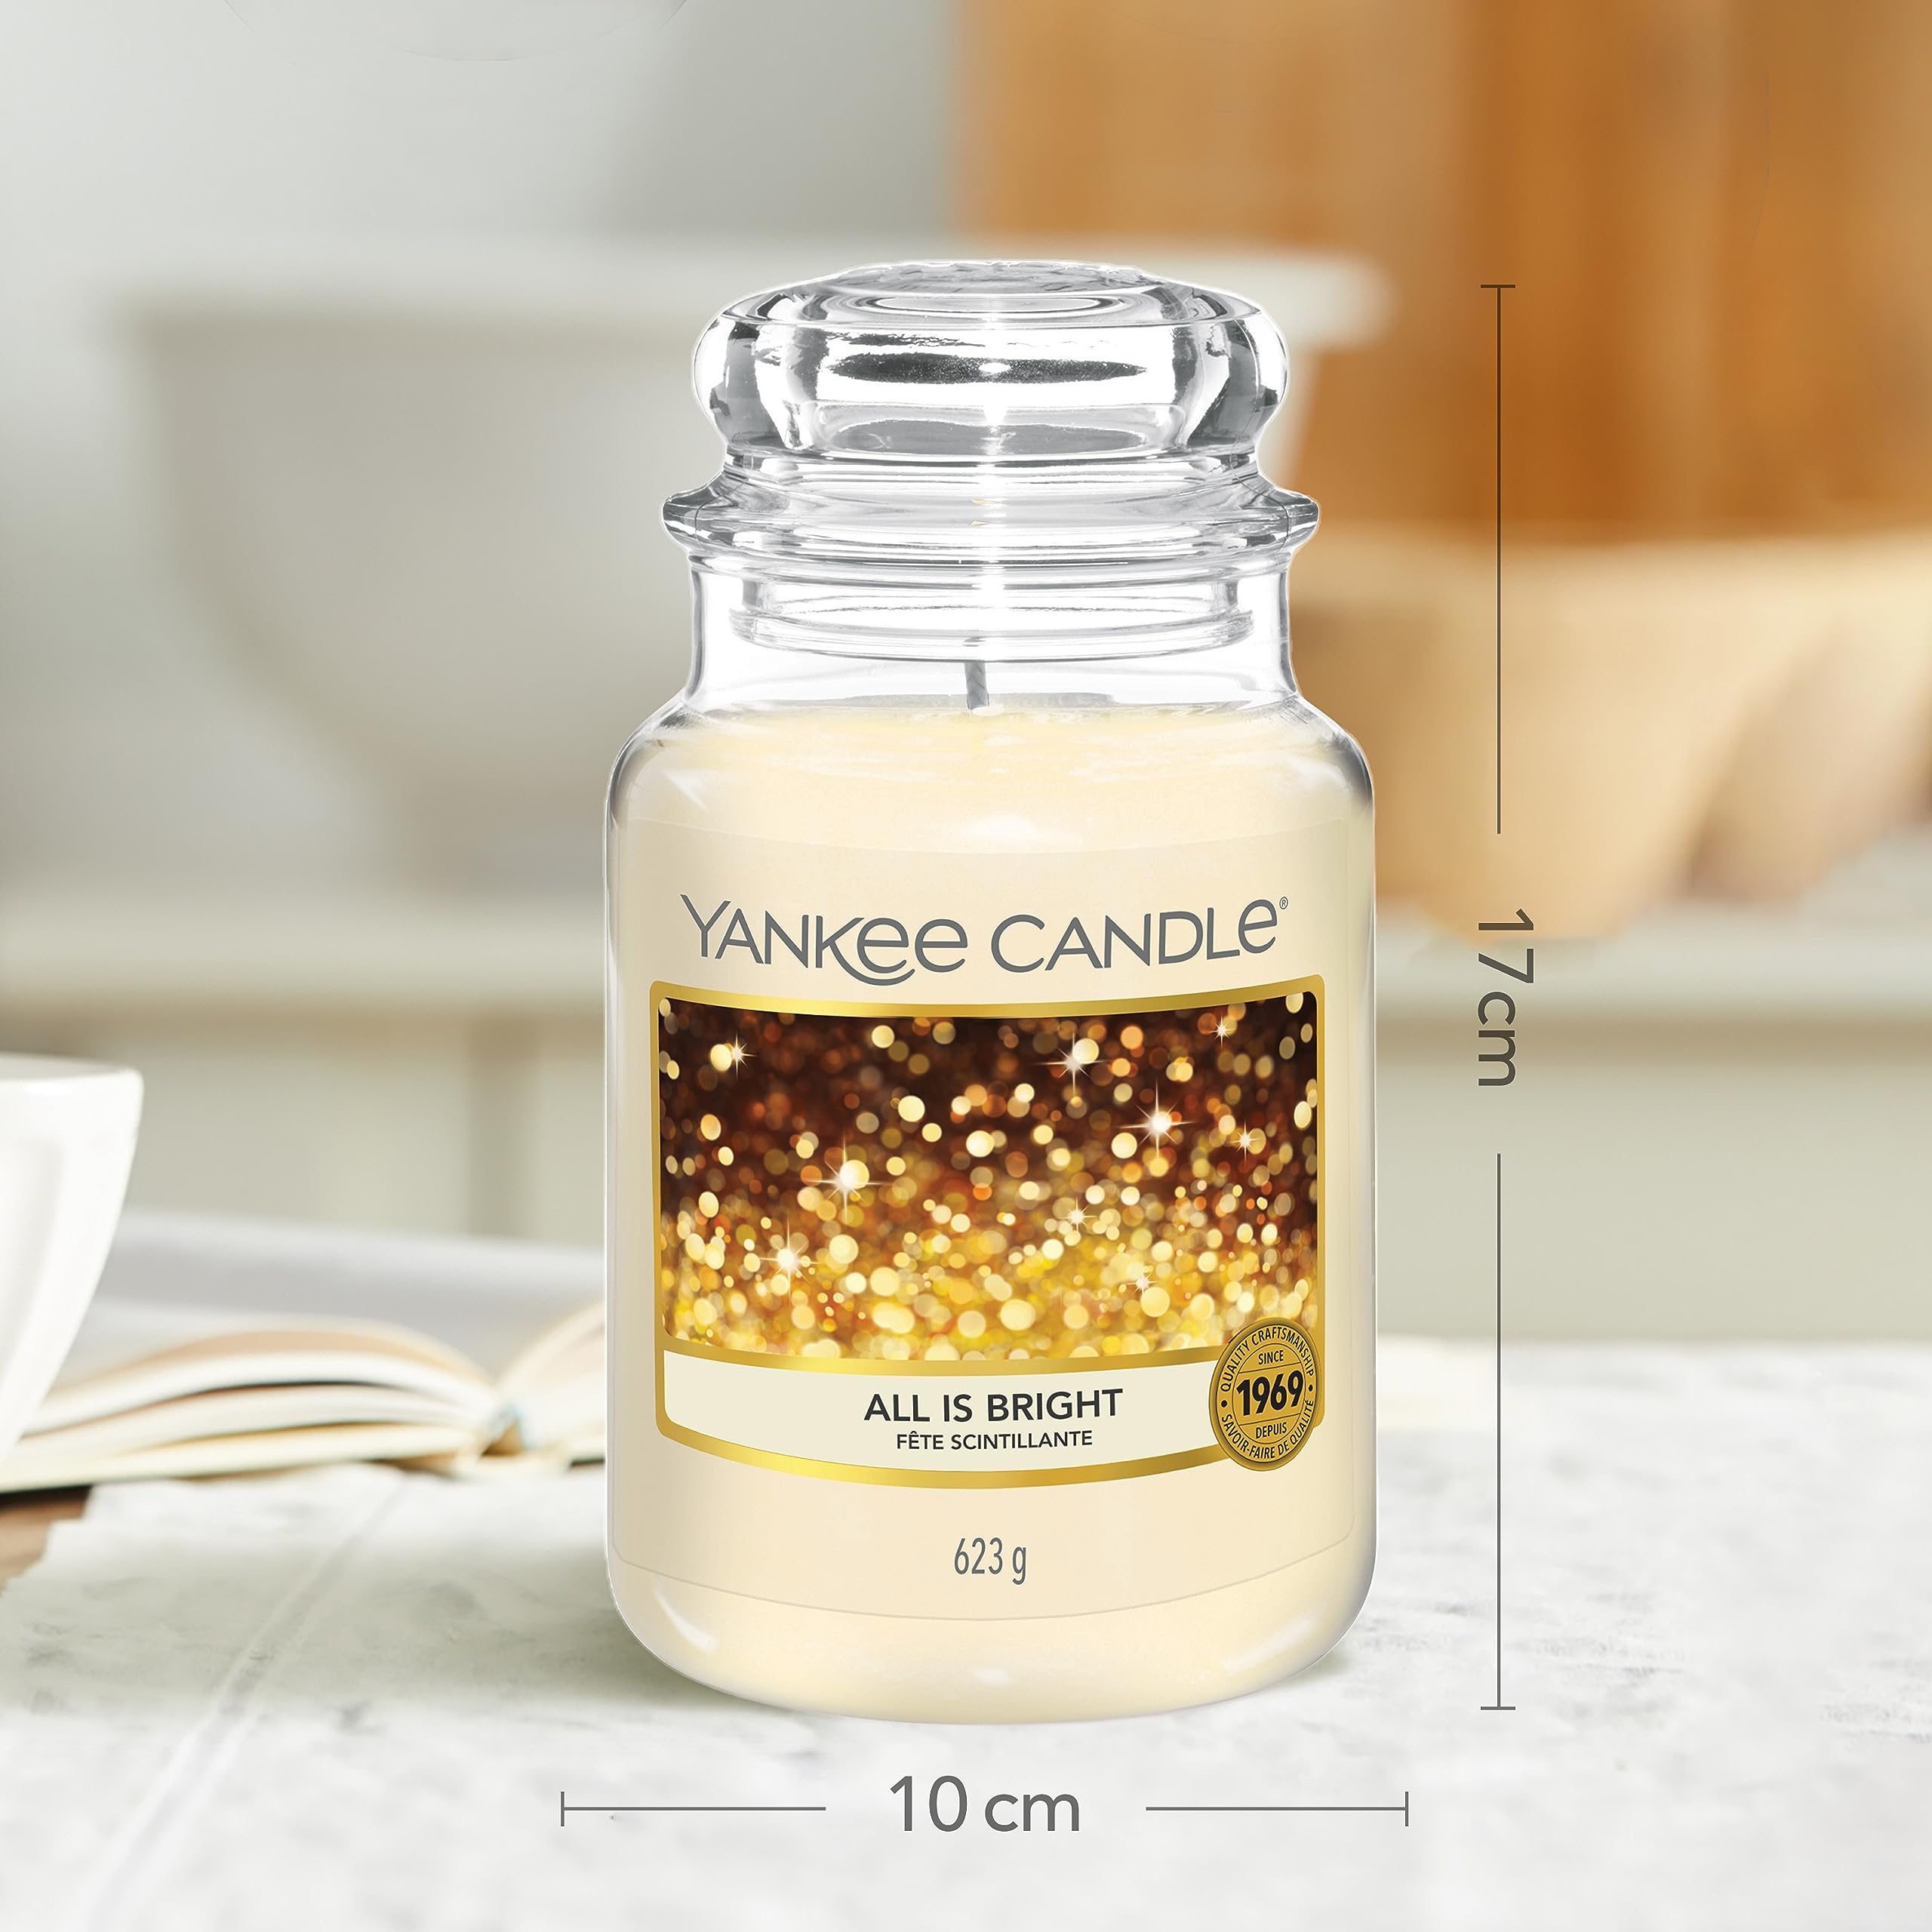 YANKEE CANDLE All is Bright Large Jar Candle, White